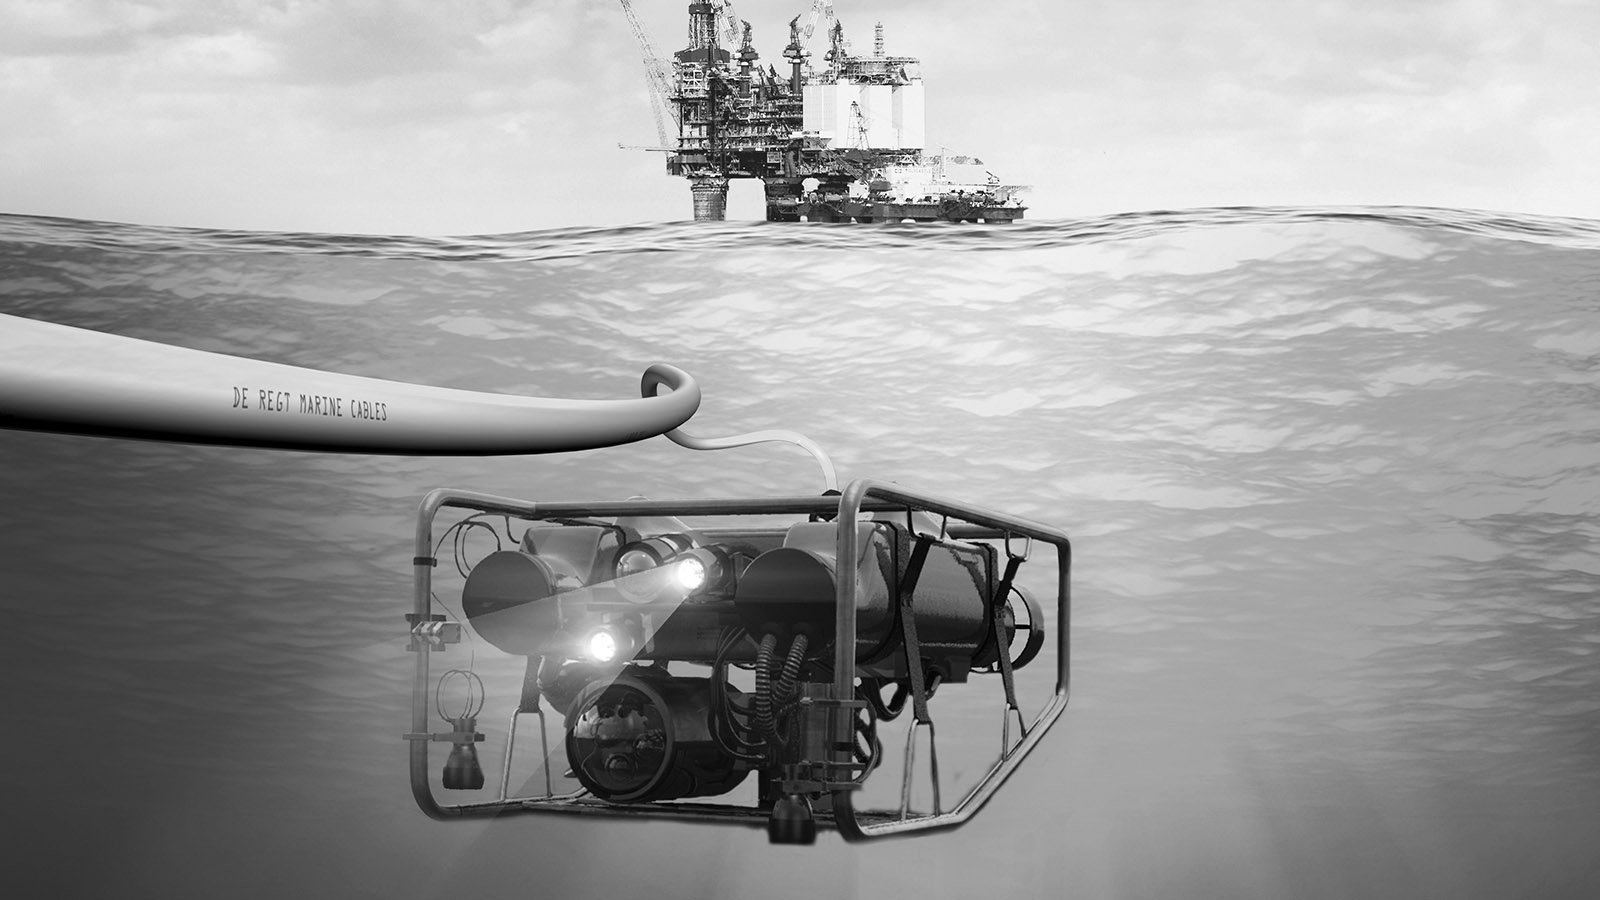 Your ROV umbilical cable: the optimal cable construction